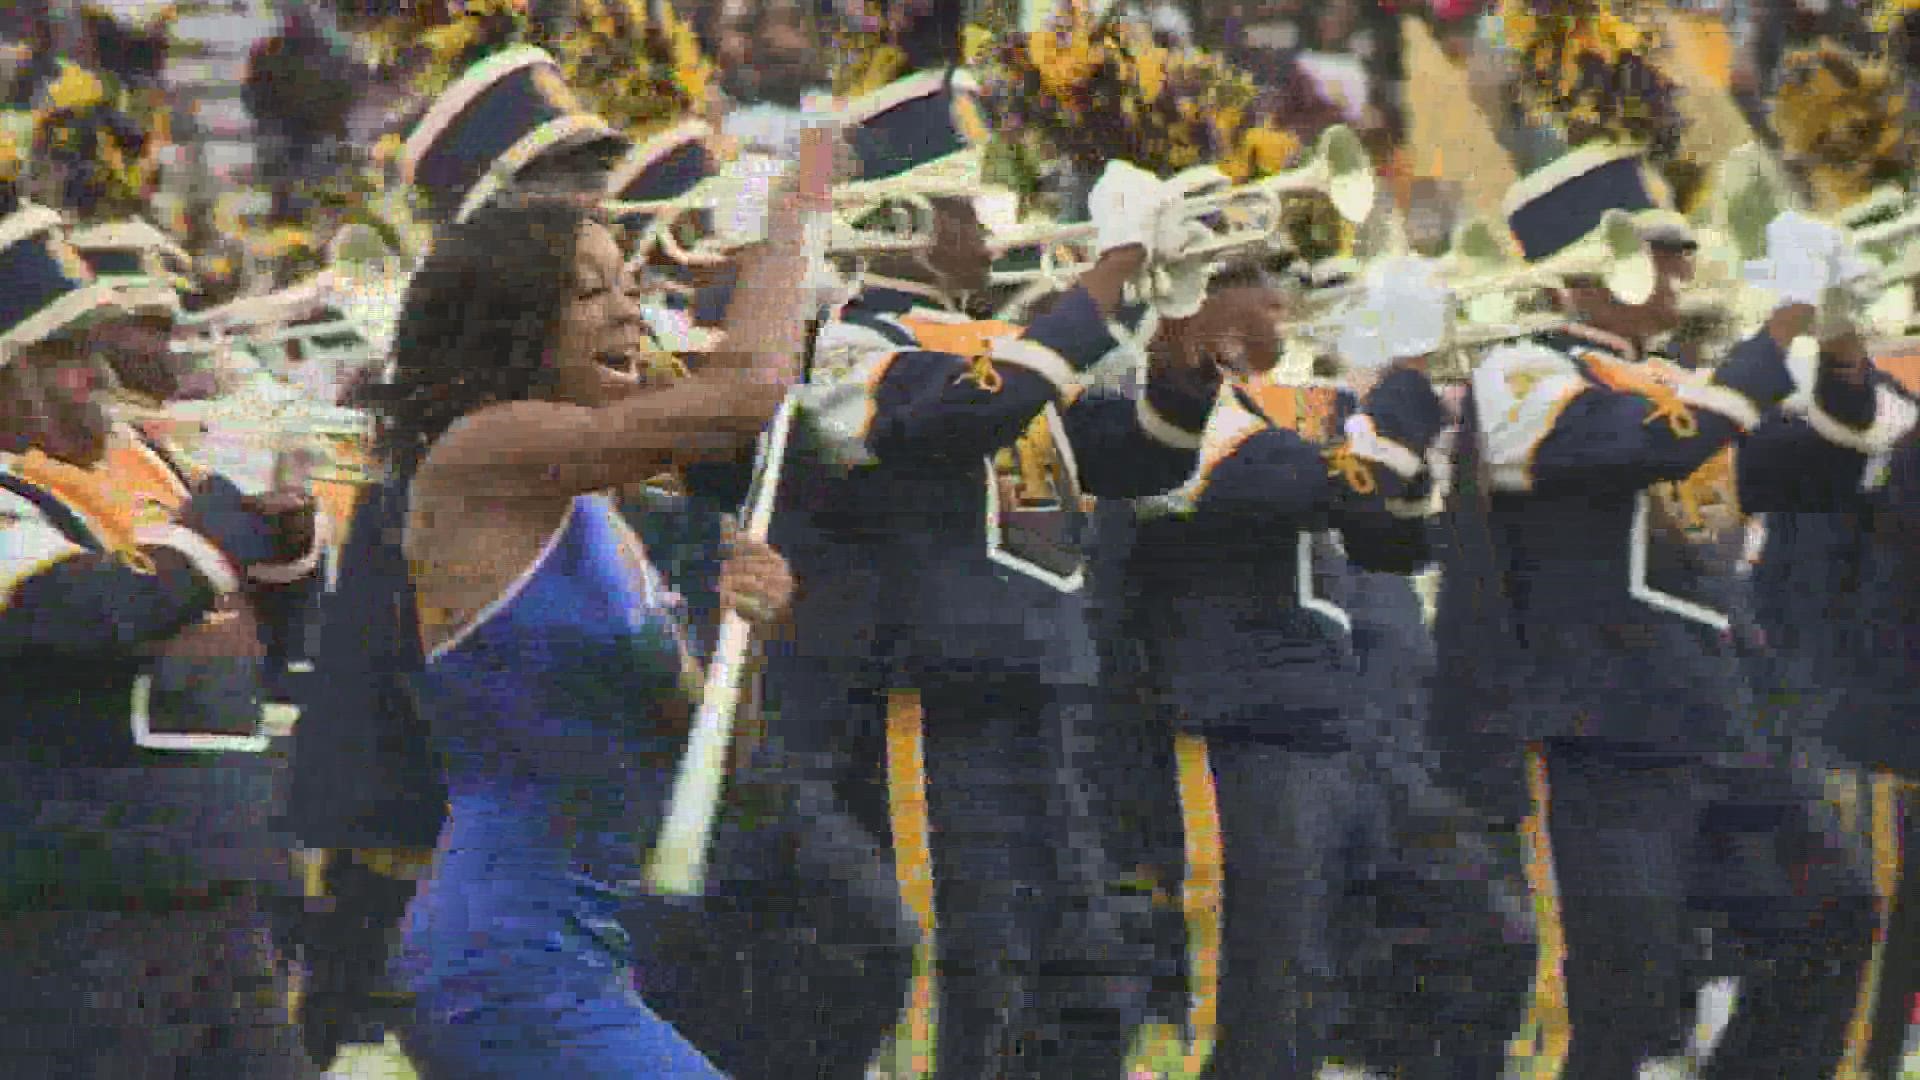 North Carolina A&T’s homecoming celebration is known as the “Greatest Homecoming on Earth.”